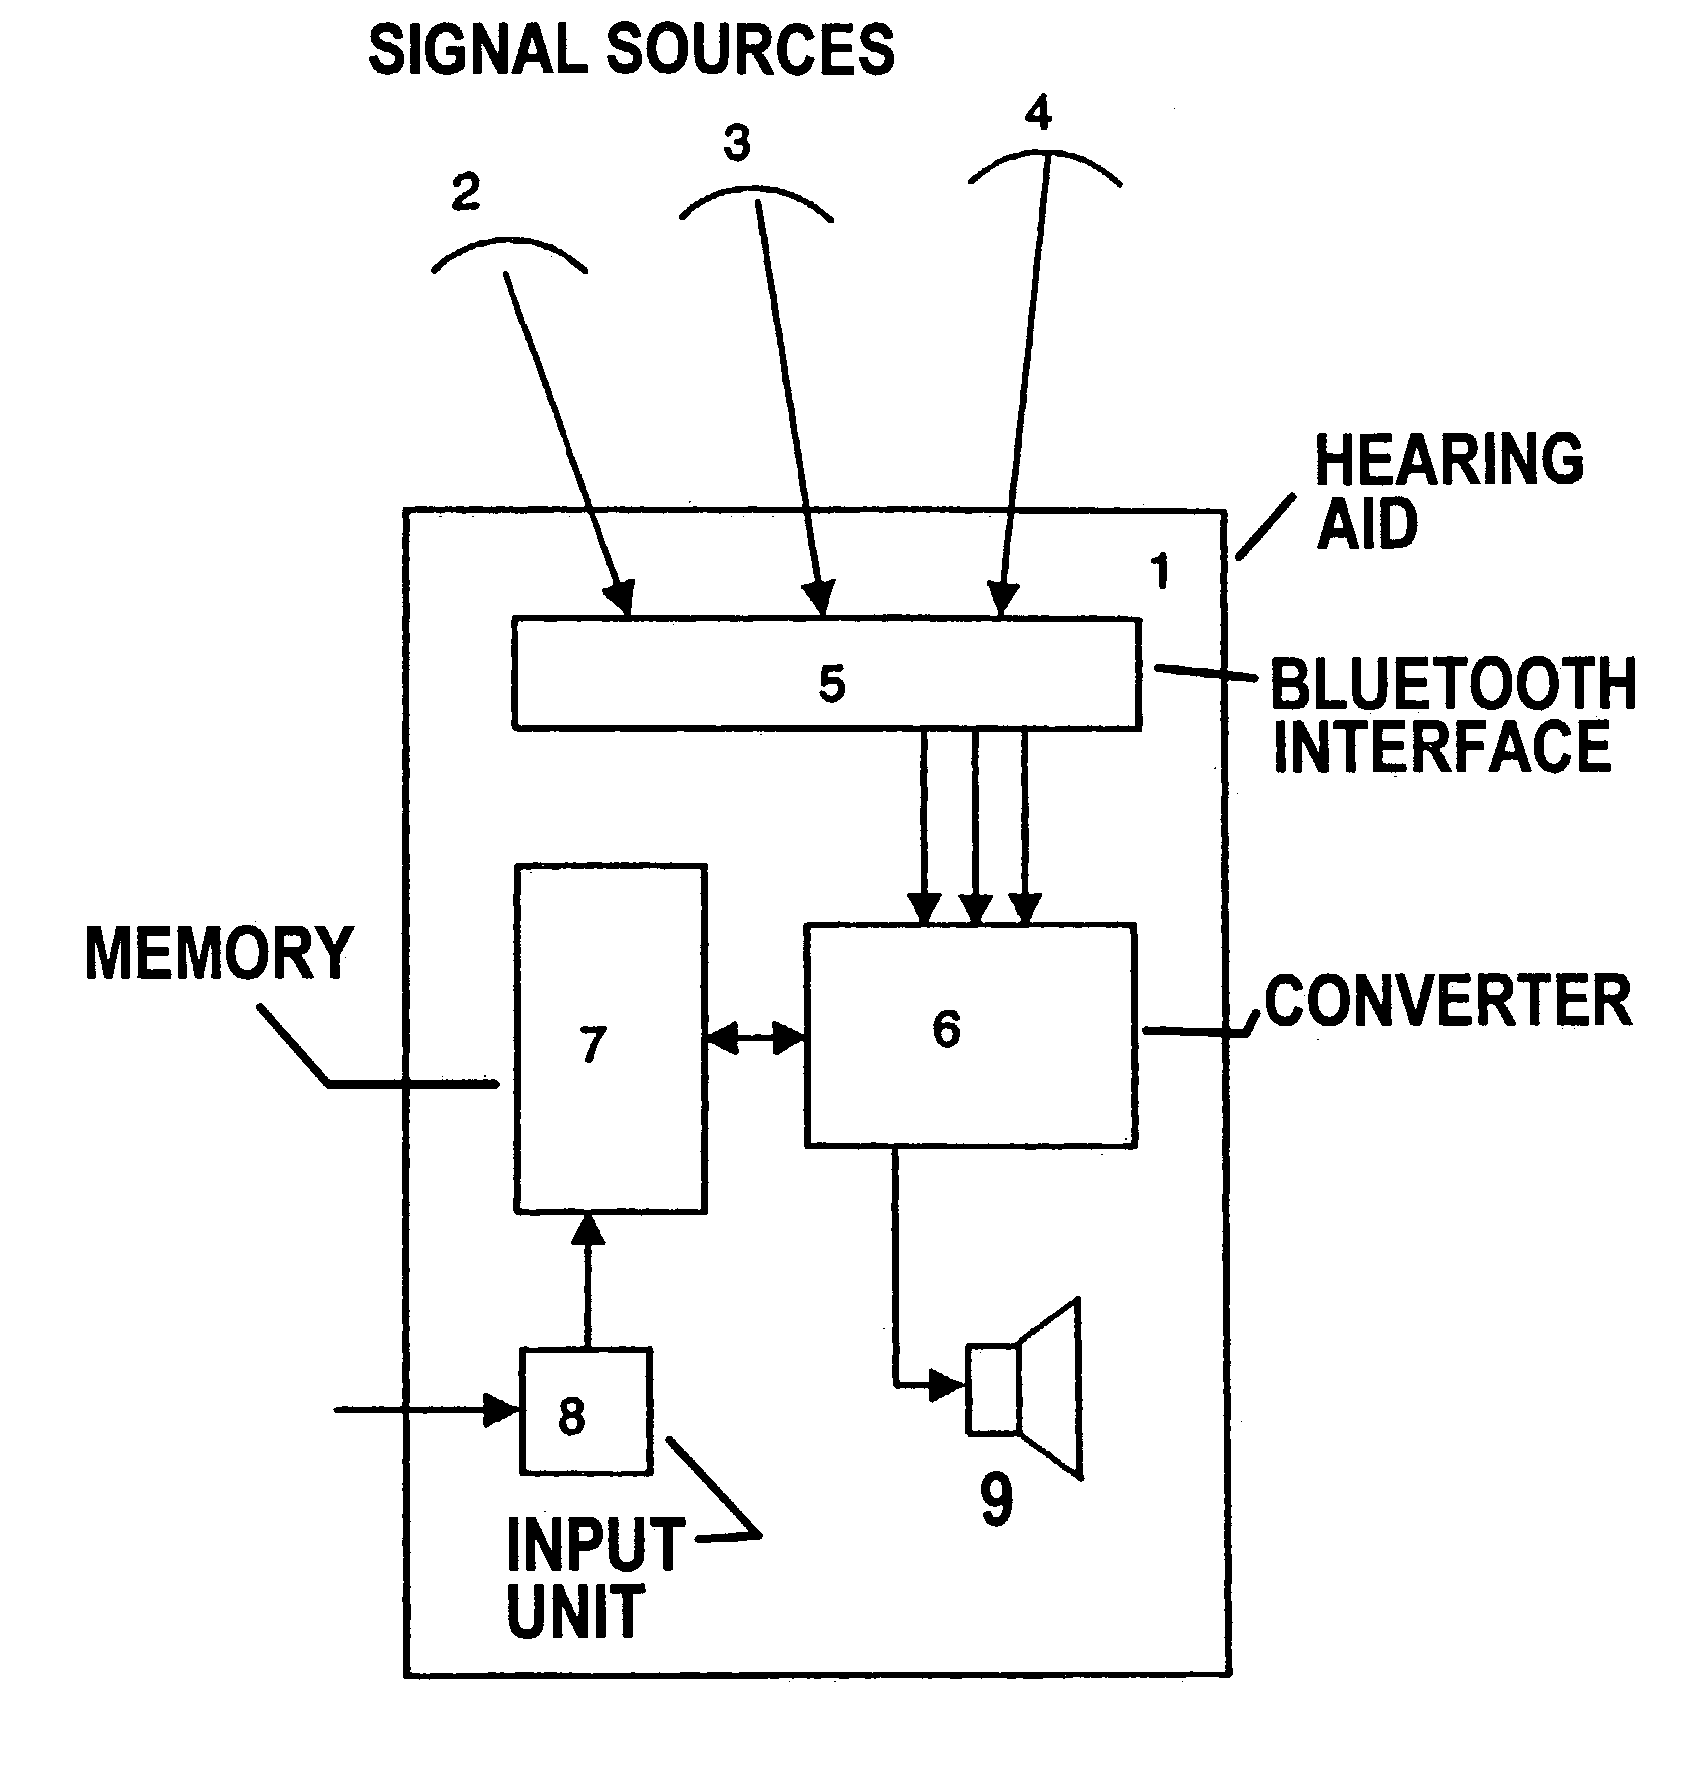 Selection of communication connections in hearing aids